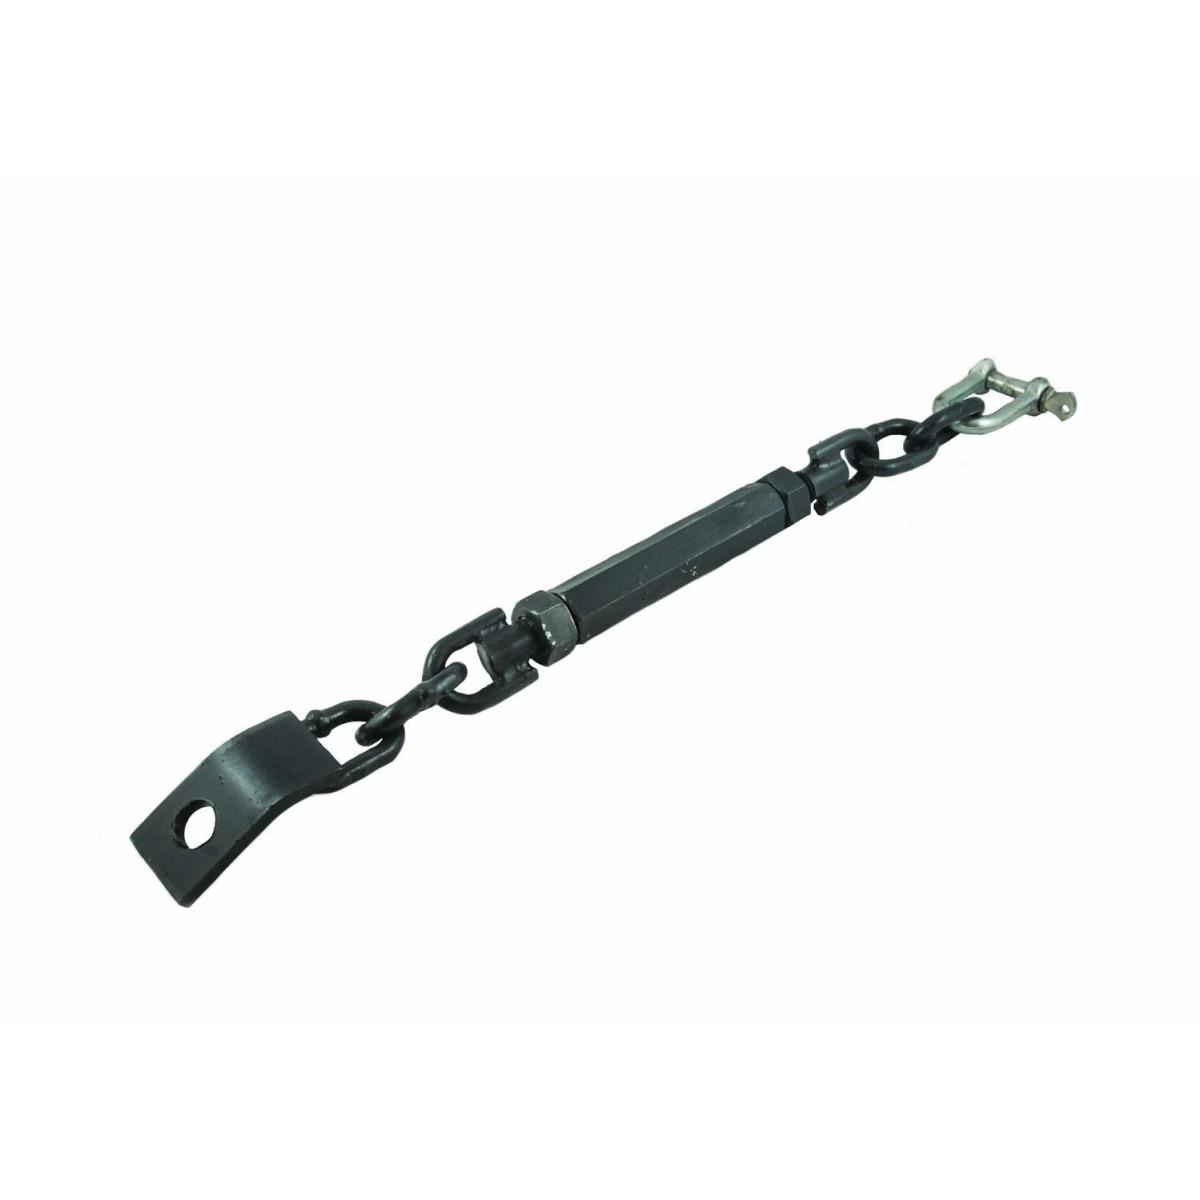 Tension chain 5 "+ shackle